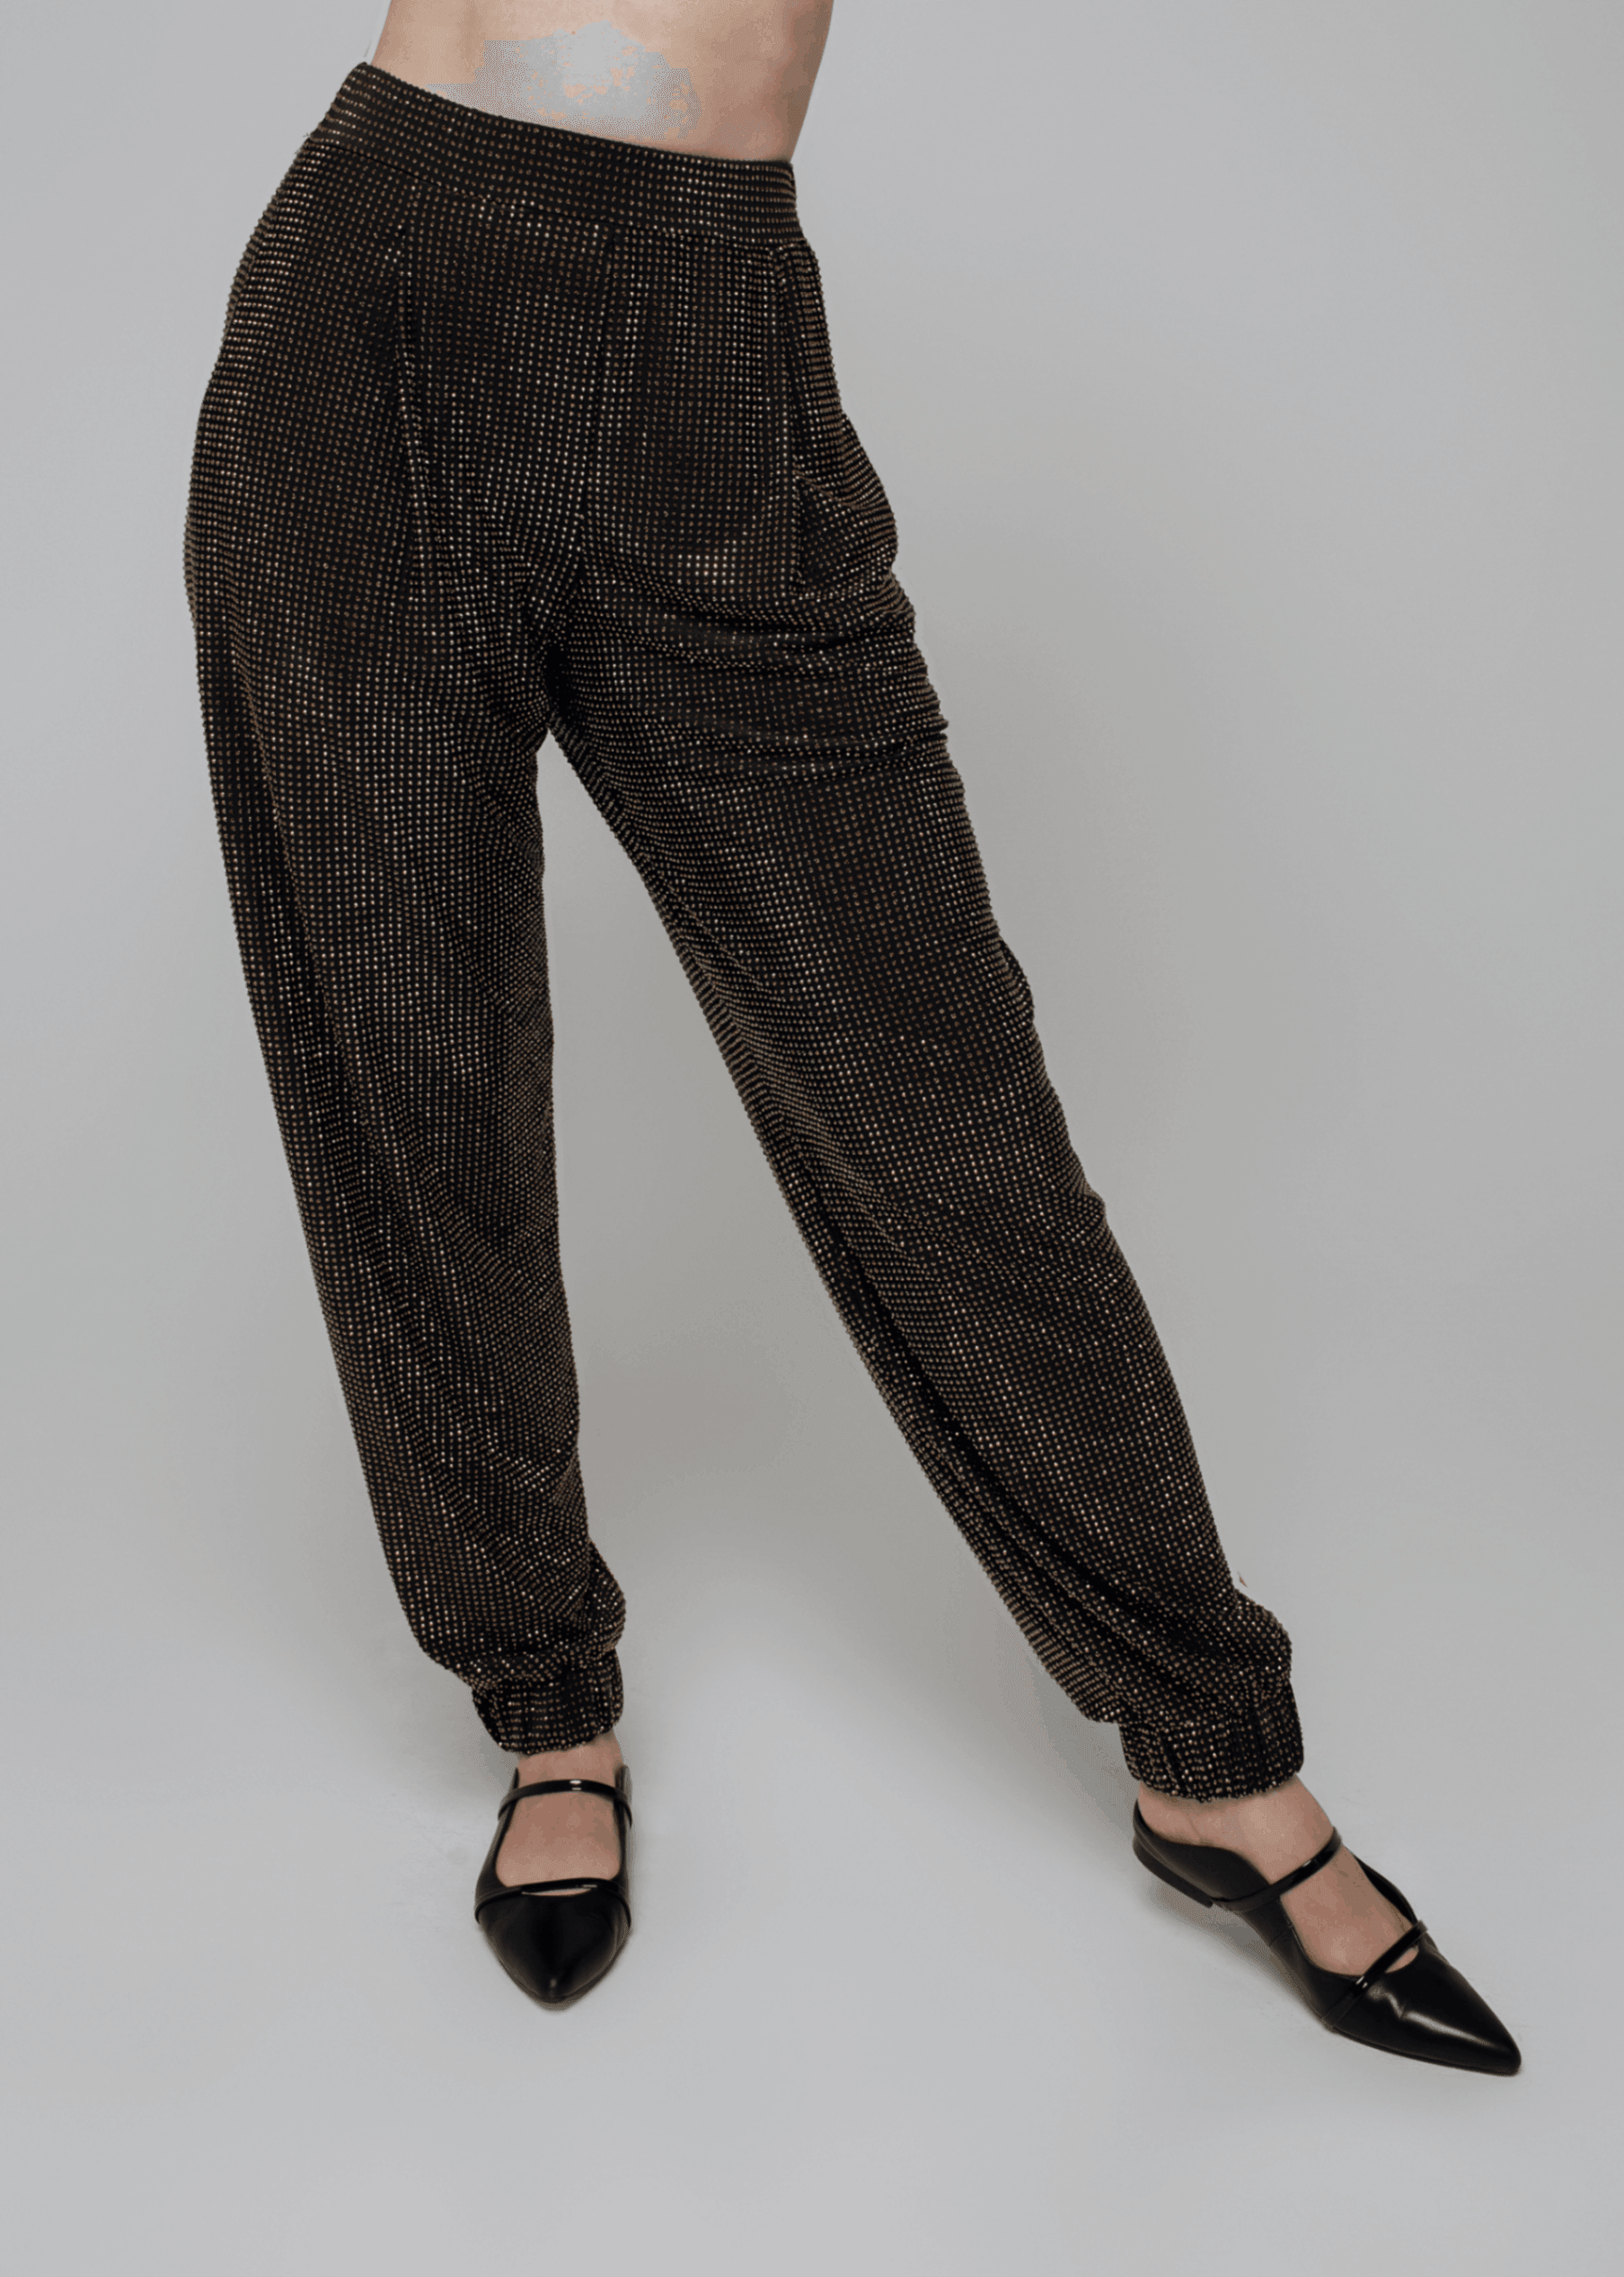 Exquisite detail of Crystal Harem Pants showcasing the fine craftsmanship and elegant design characteristic of Axinia Collection 's luxury collection.